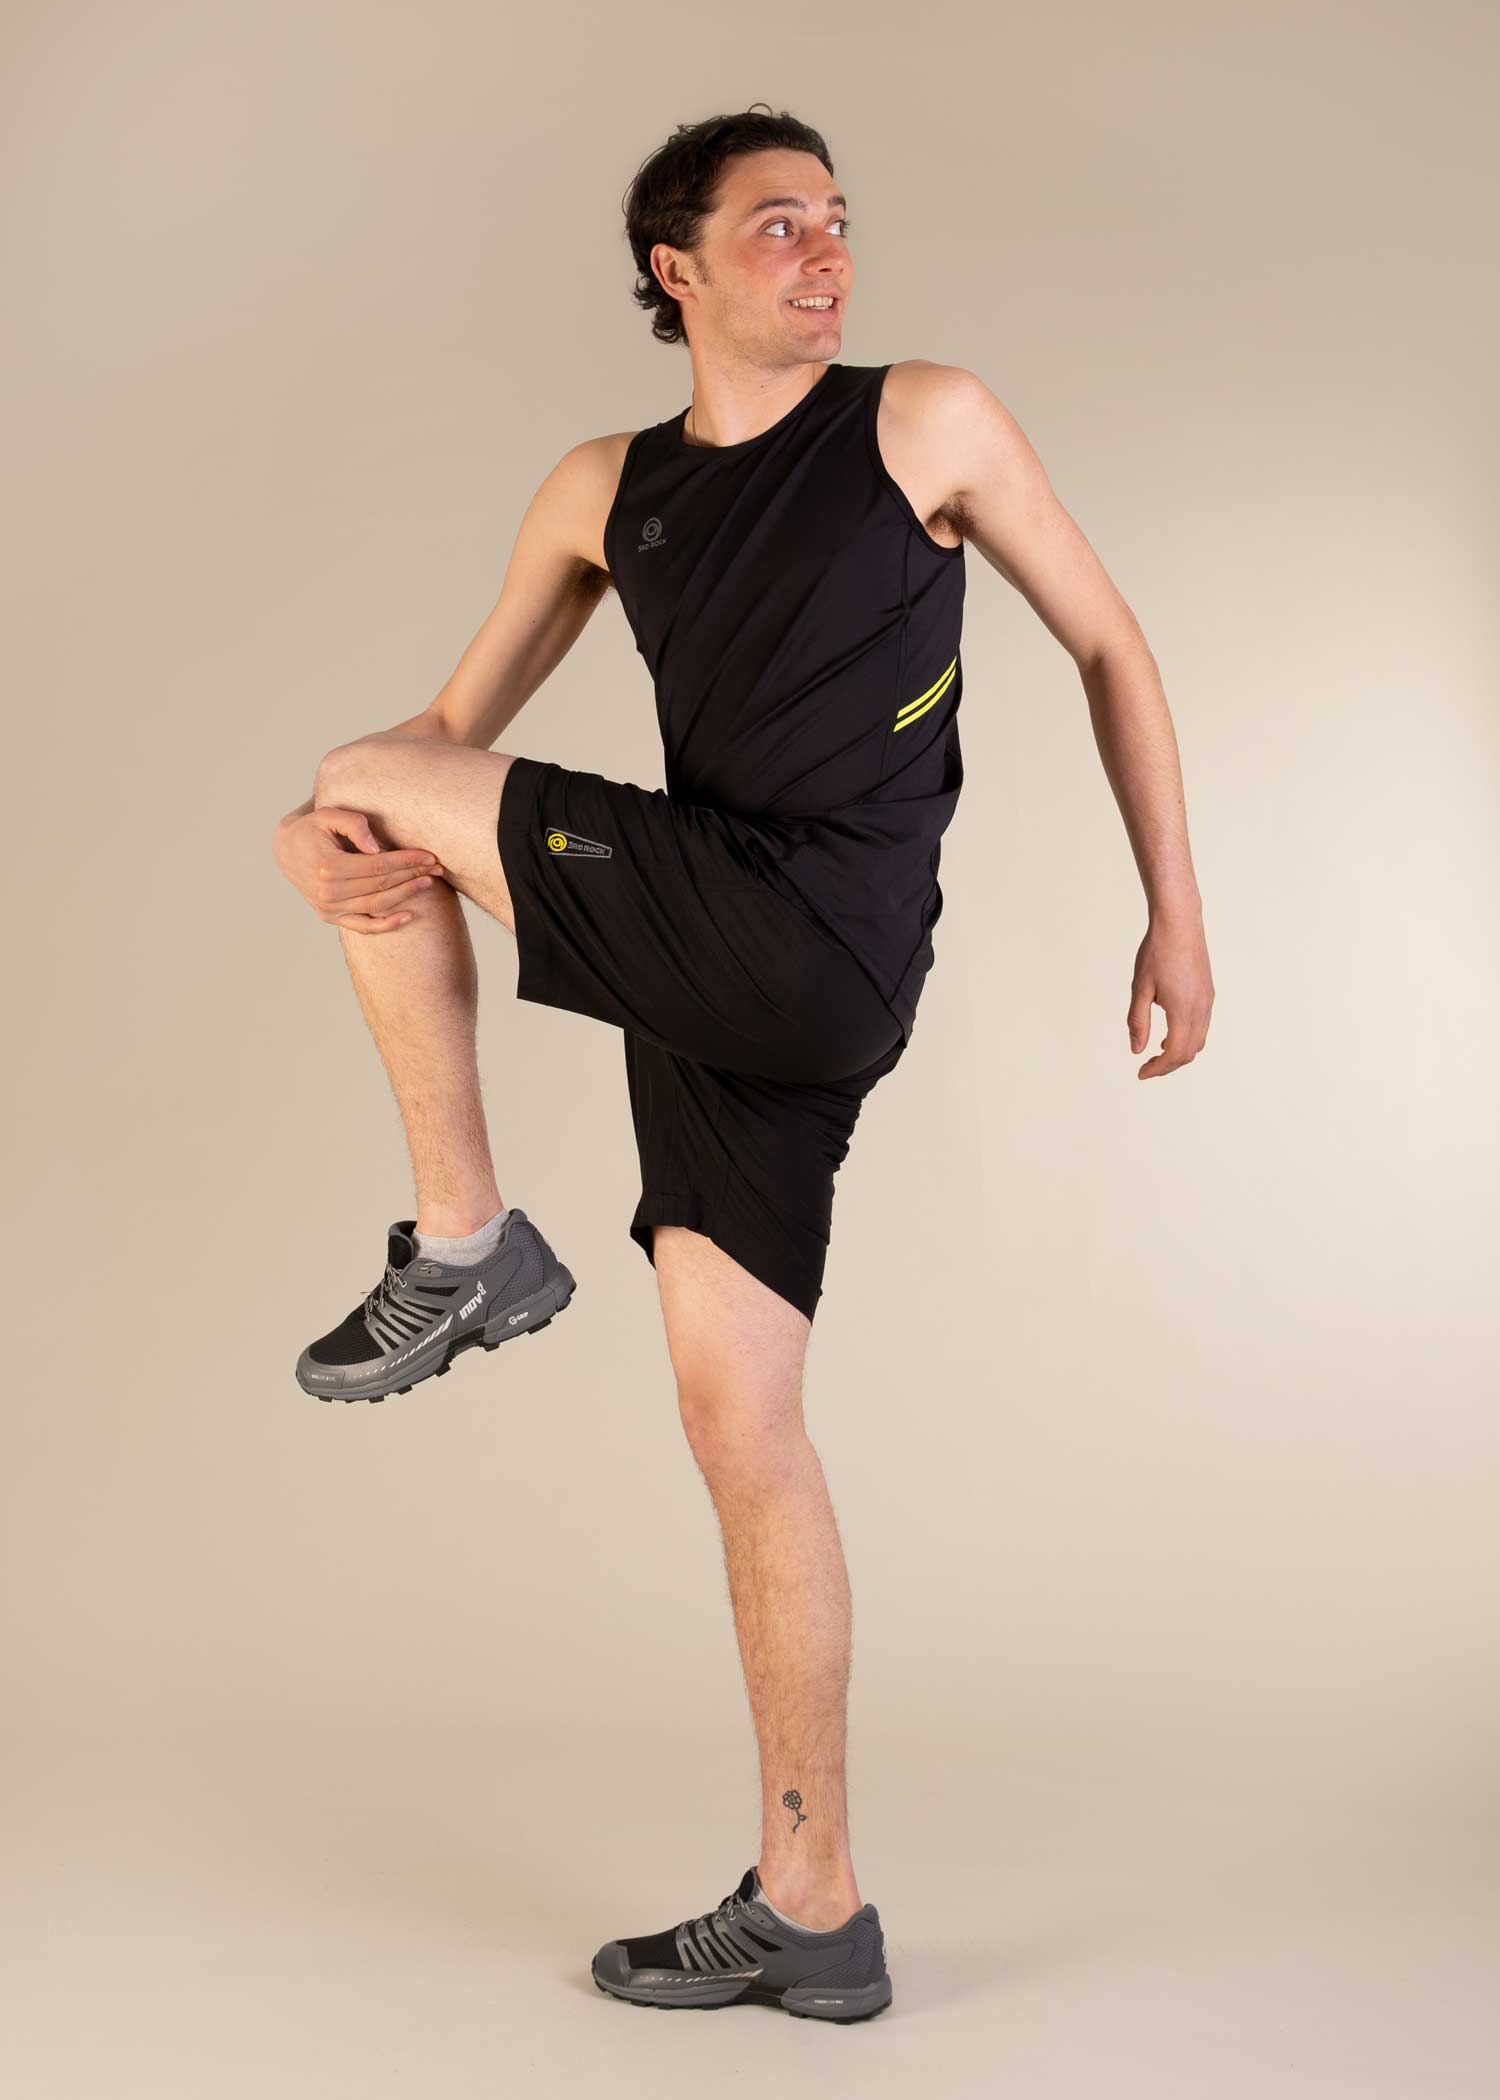 3RD ROCK Sustainable mens swimwear - Kai is 6ft 1" with a 32" waist and is wearing a 32. M